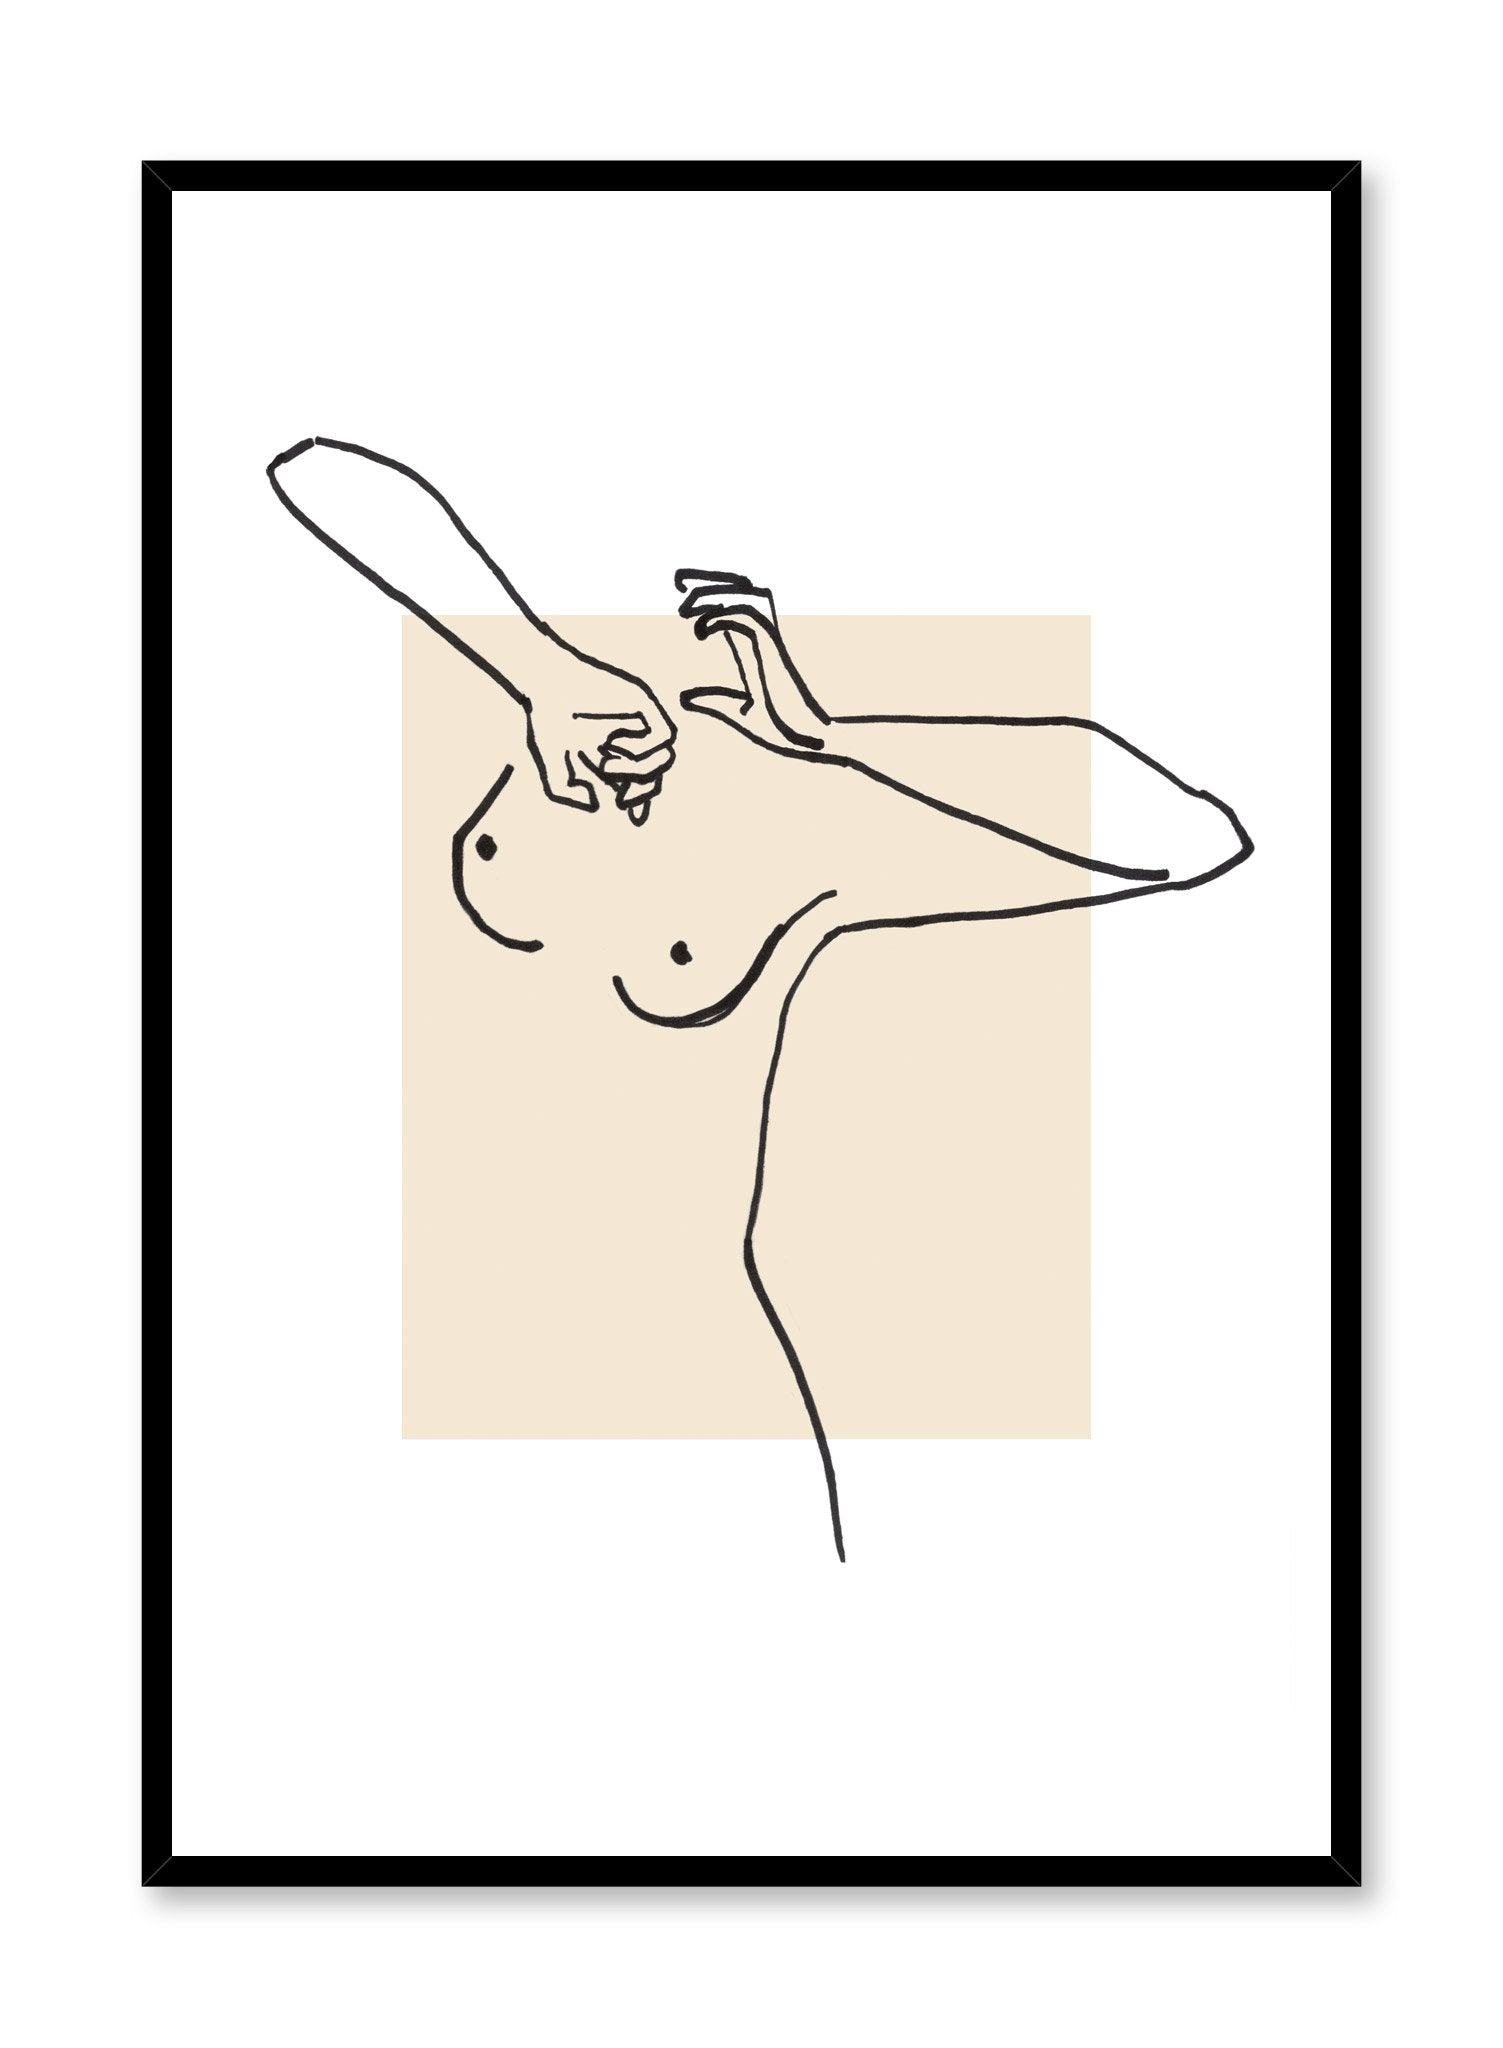 "Awakening" is a minimalist beige and white illustration poster by Opposite Wall of a line art female nude superimposed over a beige square.